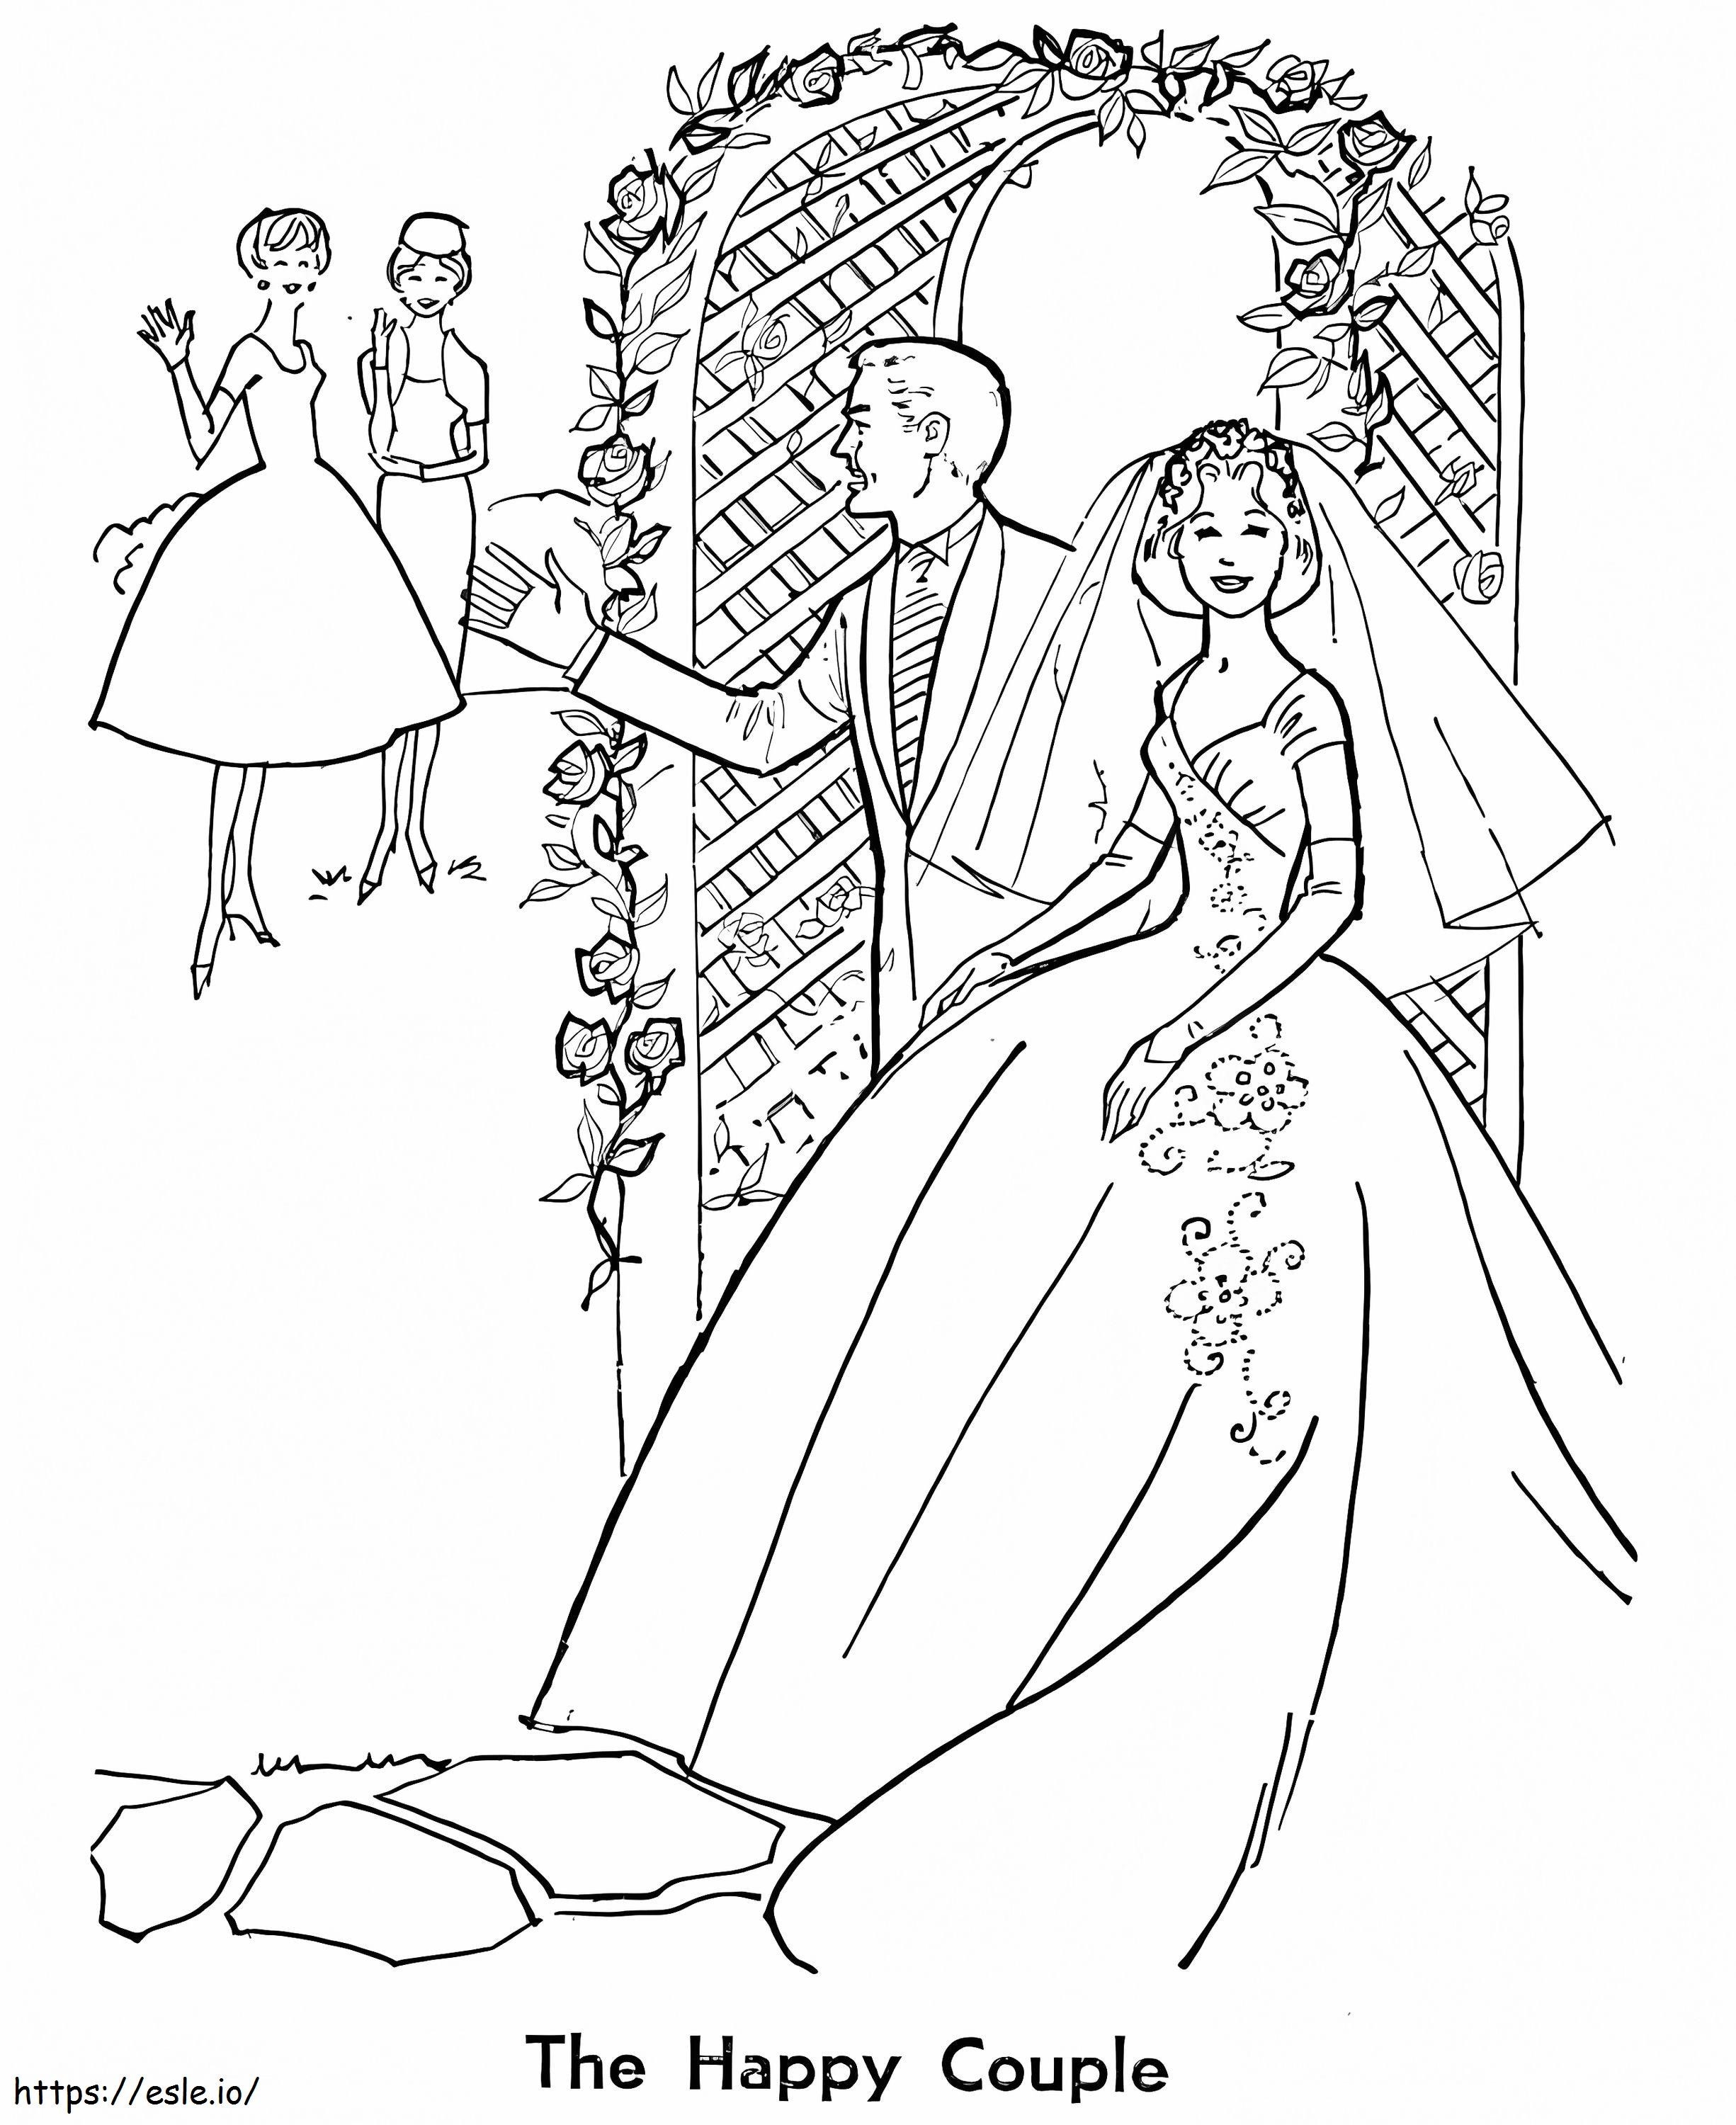 The Happy Couple coloring page